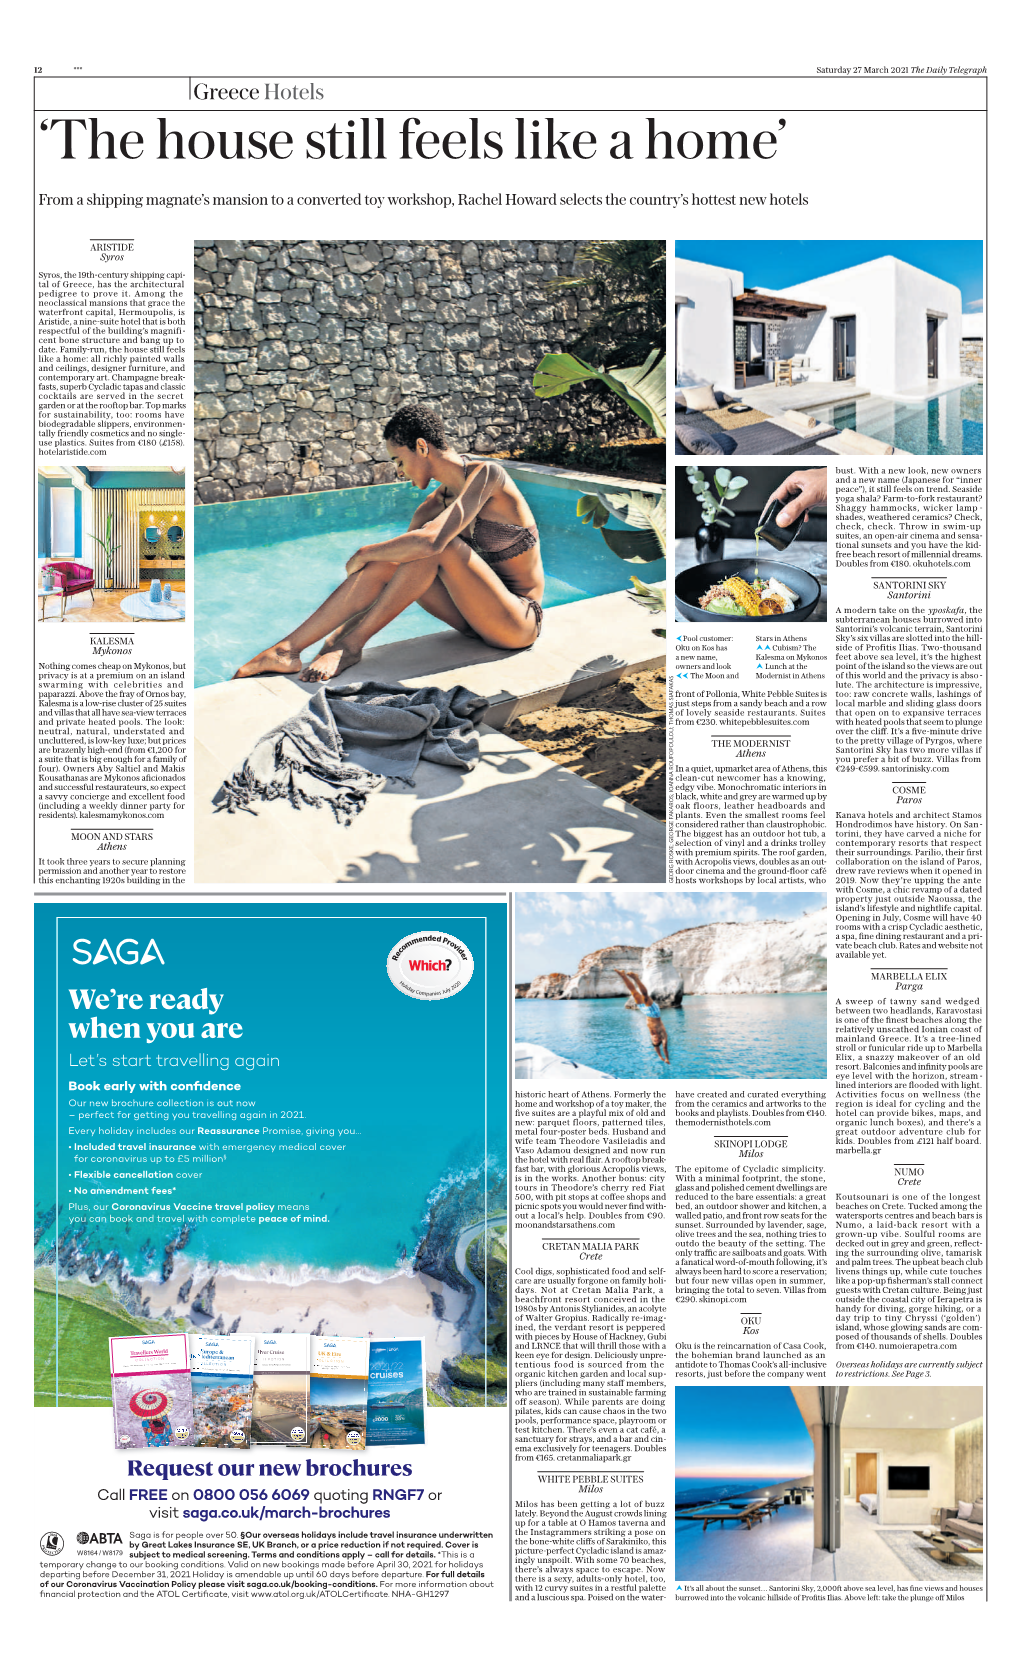 The Daily Telegraph Greece Hotels ‘The House Still Feels Like a Home’